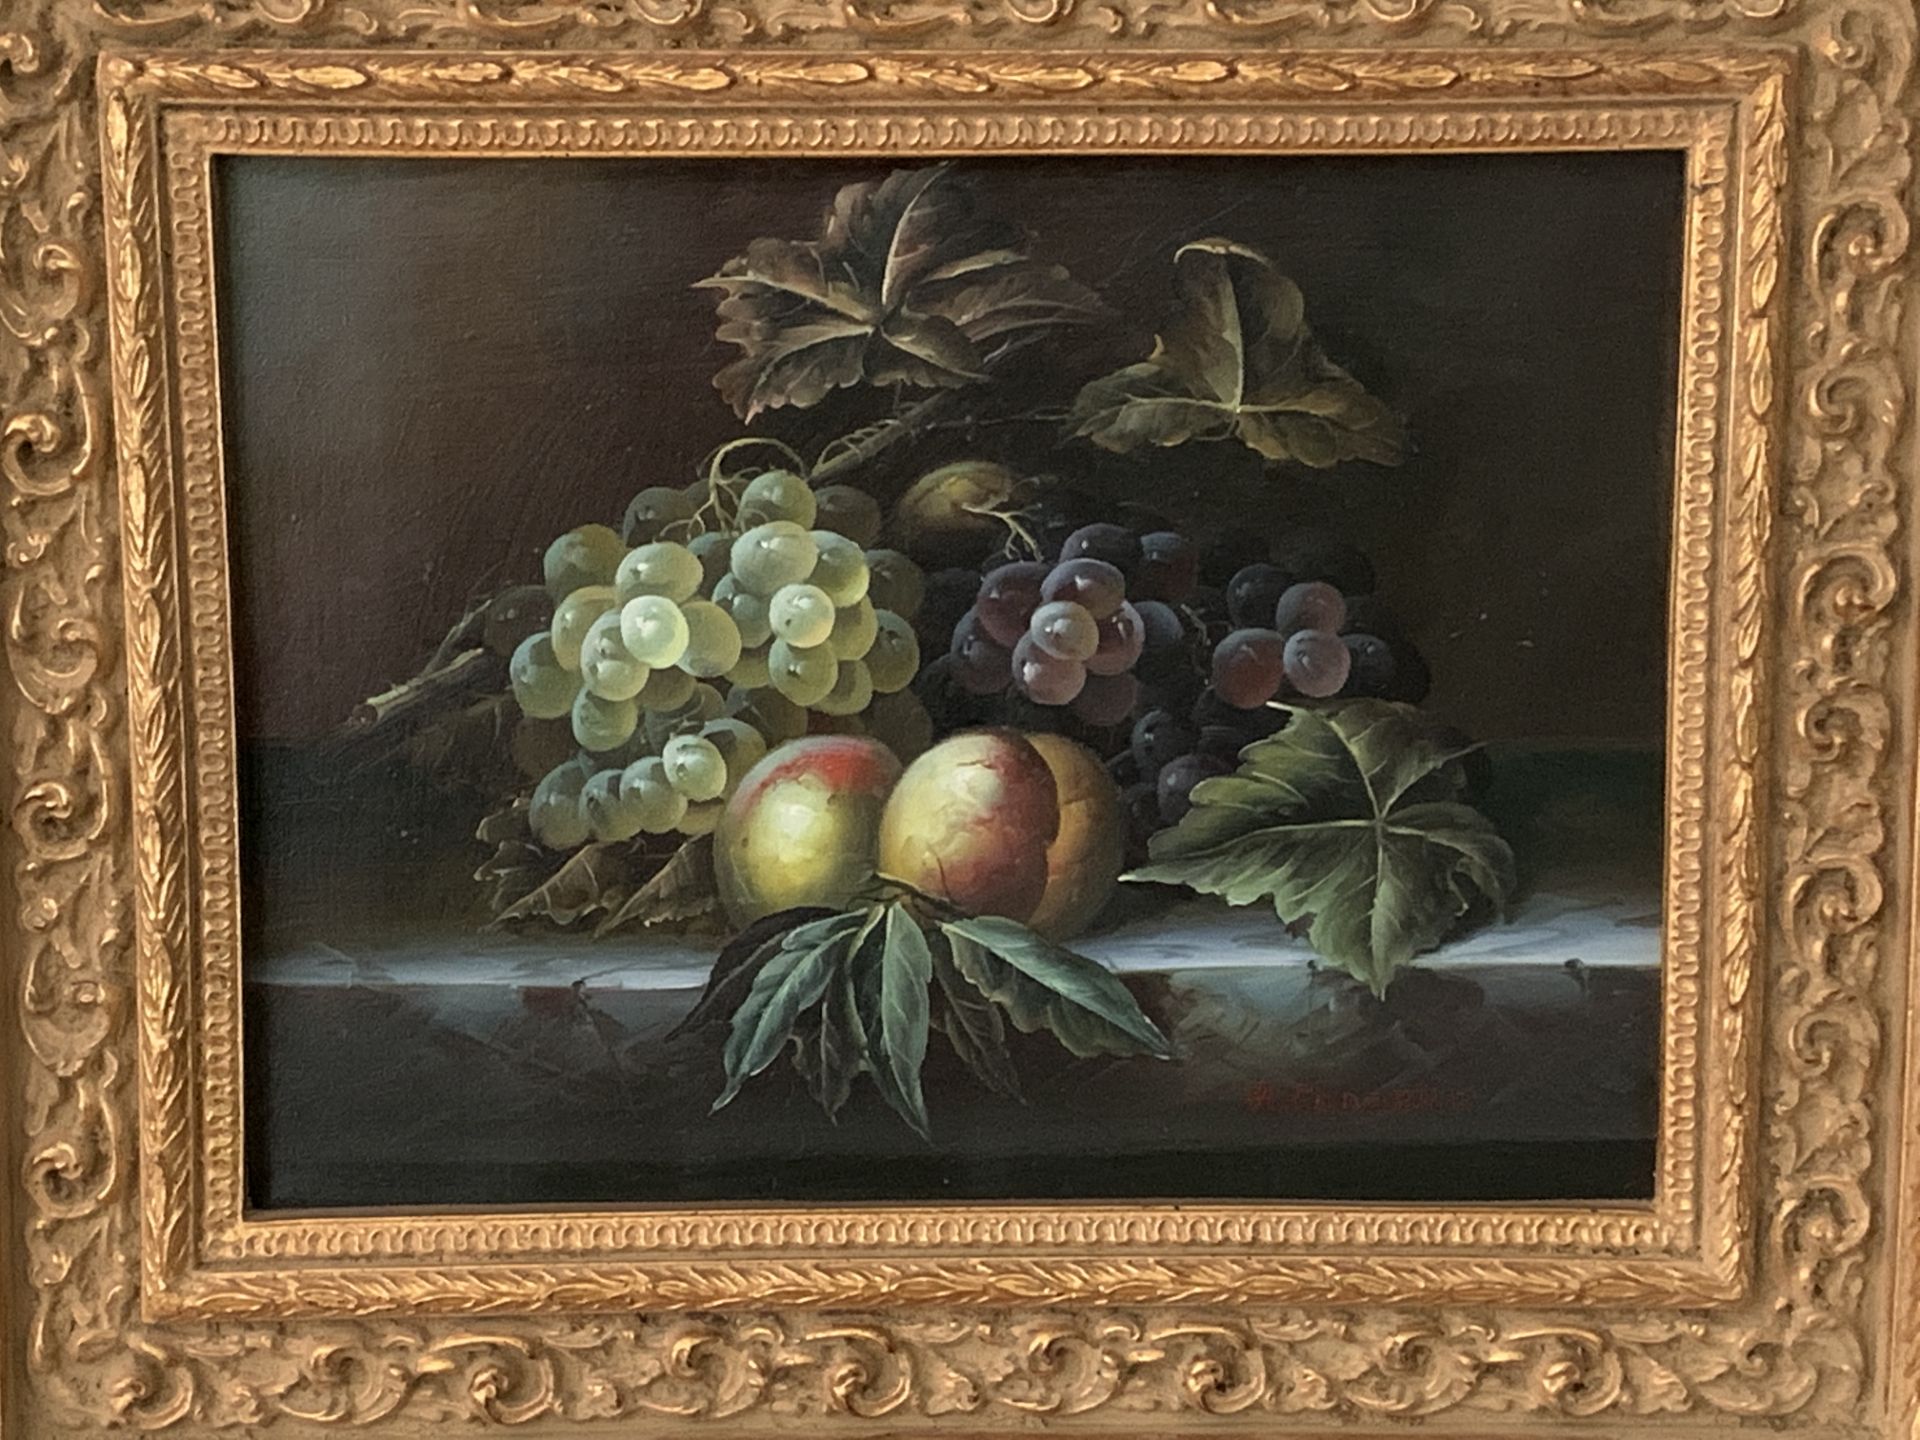 Two gilt framed oil on canvas paintings by R. Canzelo